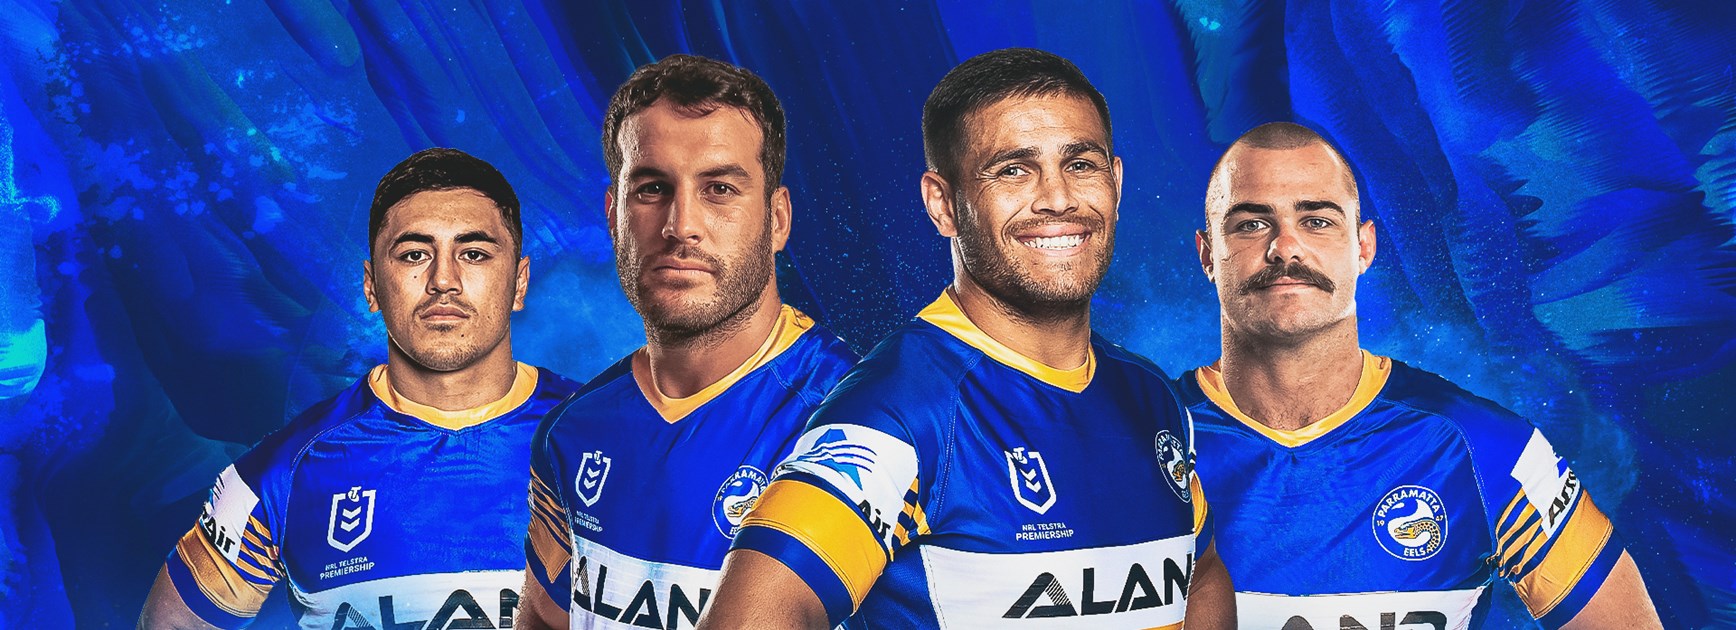 Parramatta Eels add four players to its 2021 NRL squad